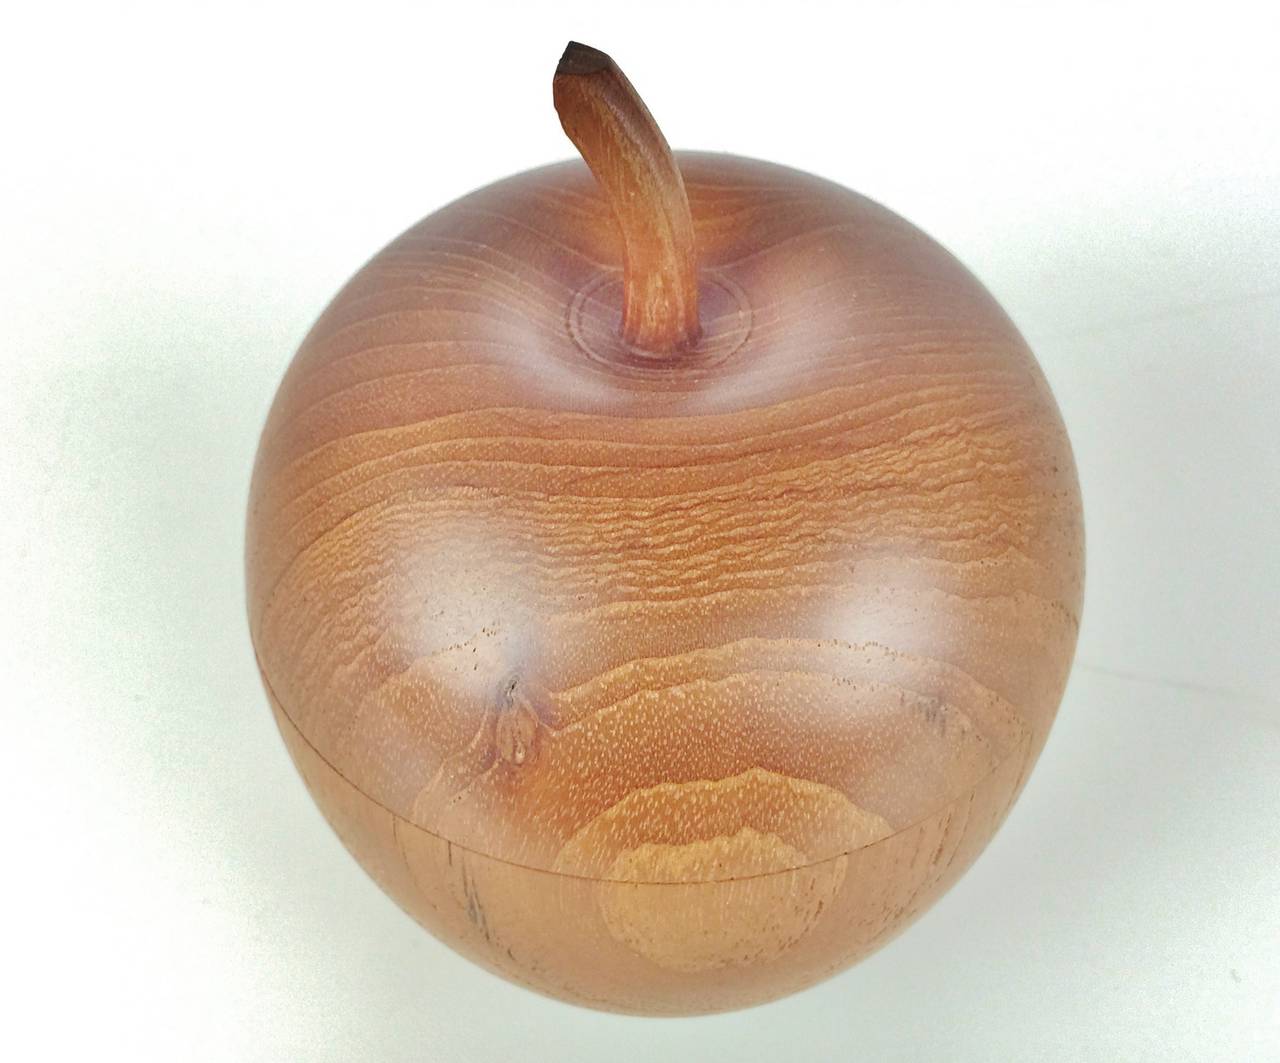 This lovely little apple shaped box is beautifully turned from a solid piece of teak, finely hewn and with a well fitting lid. Even the little apple stem and the bottom of the apple are very lifelike. In amazing condition and with a lovely warm